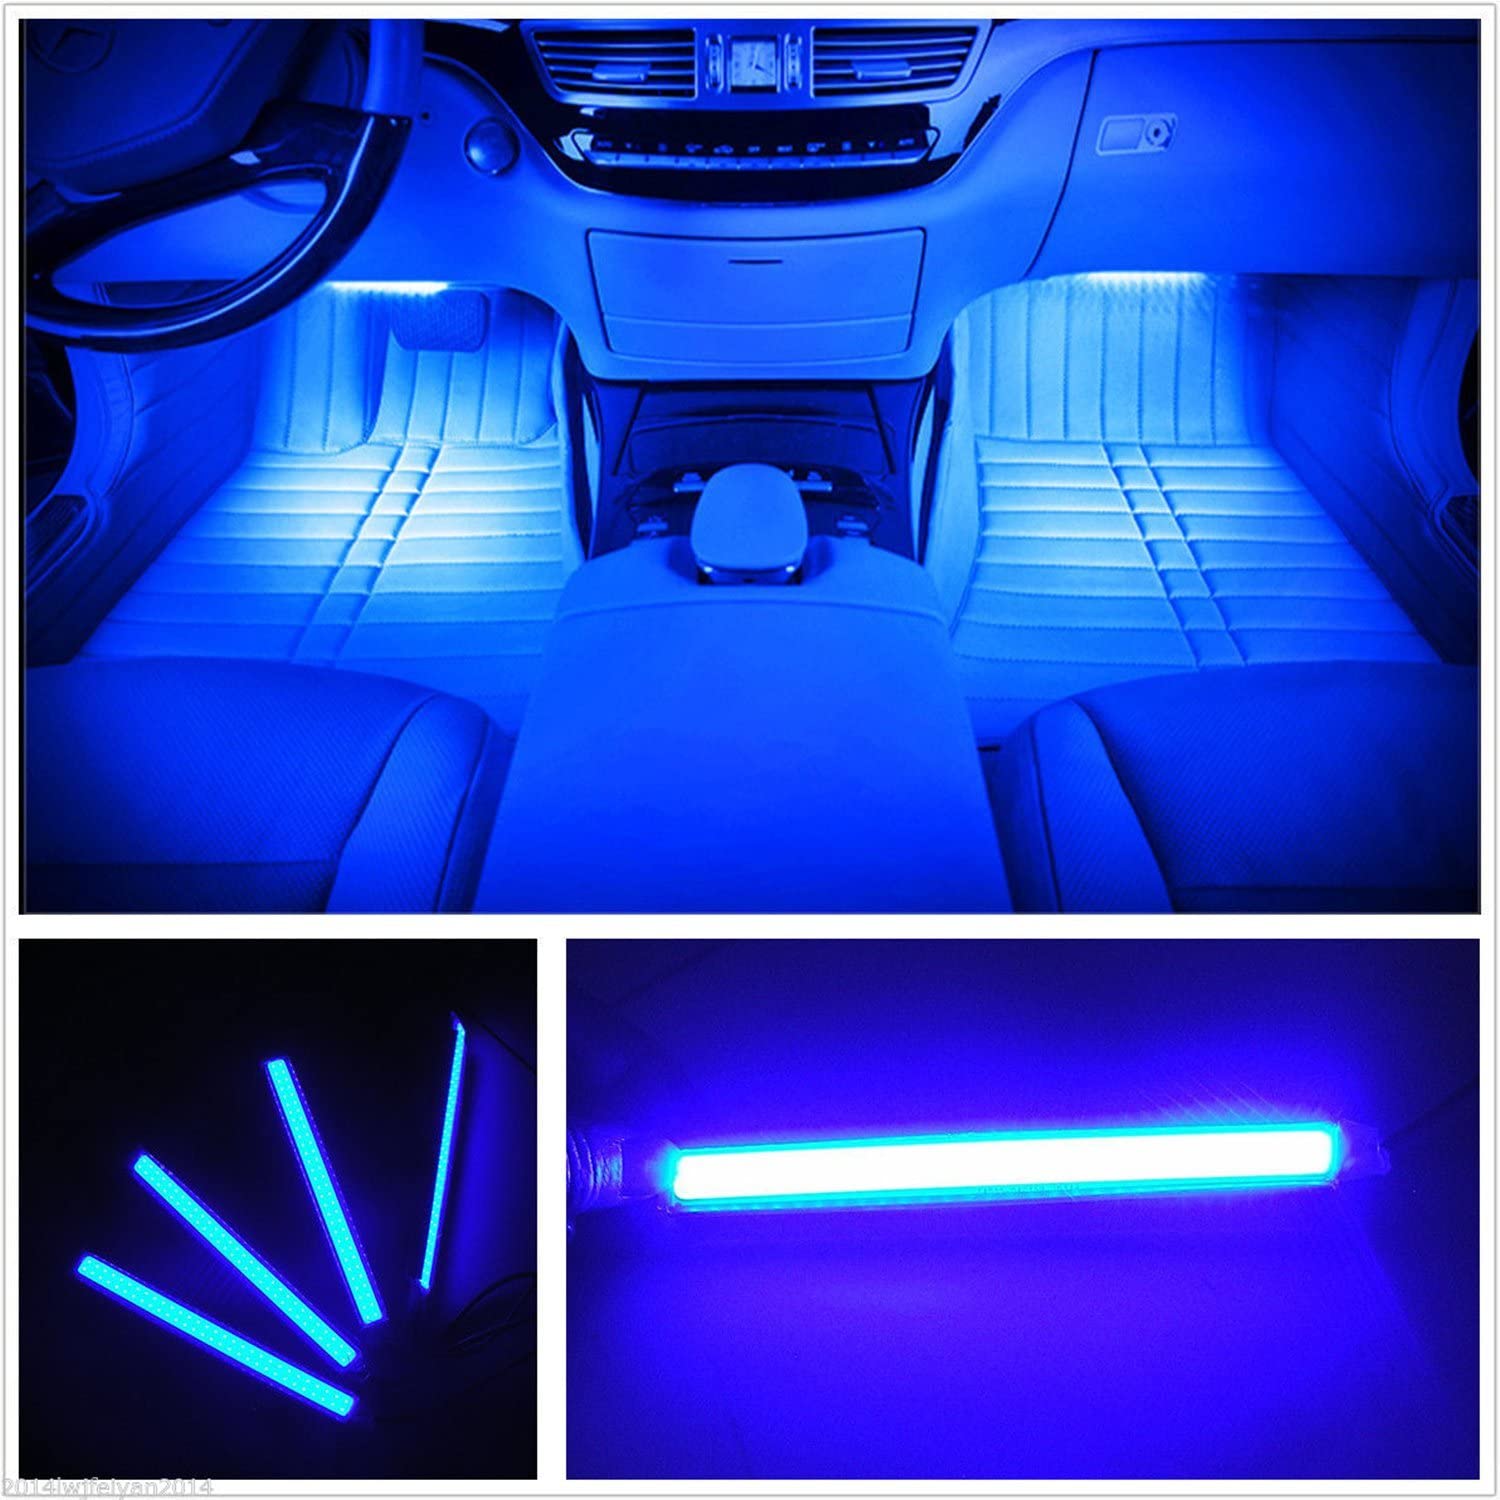 Car Audio Systems and LED Lighting | Raleigh, NC